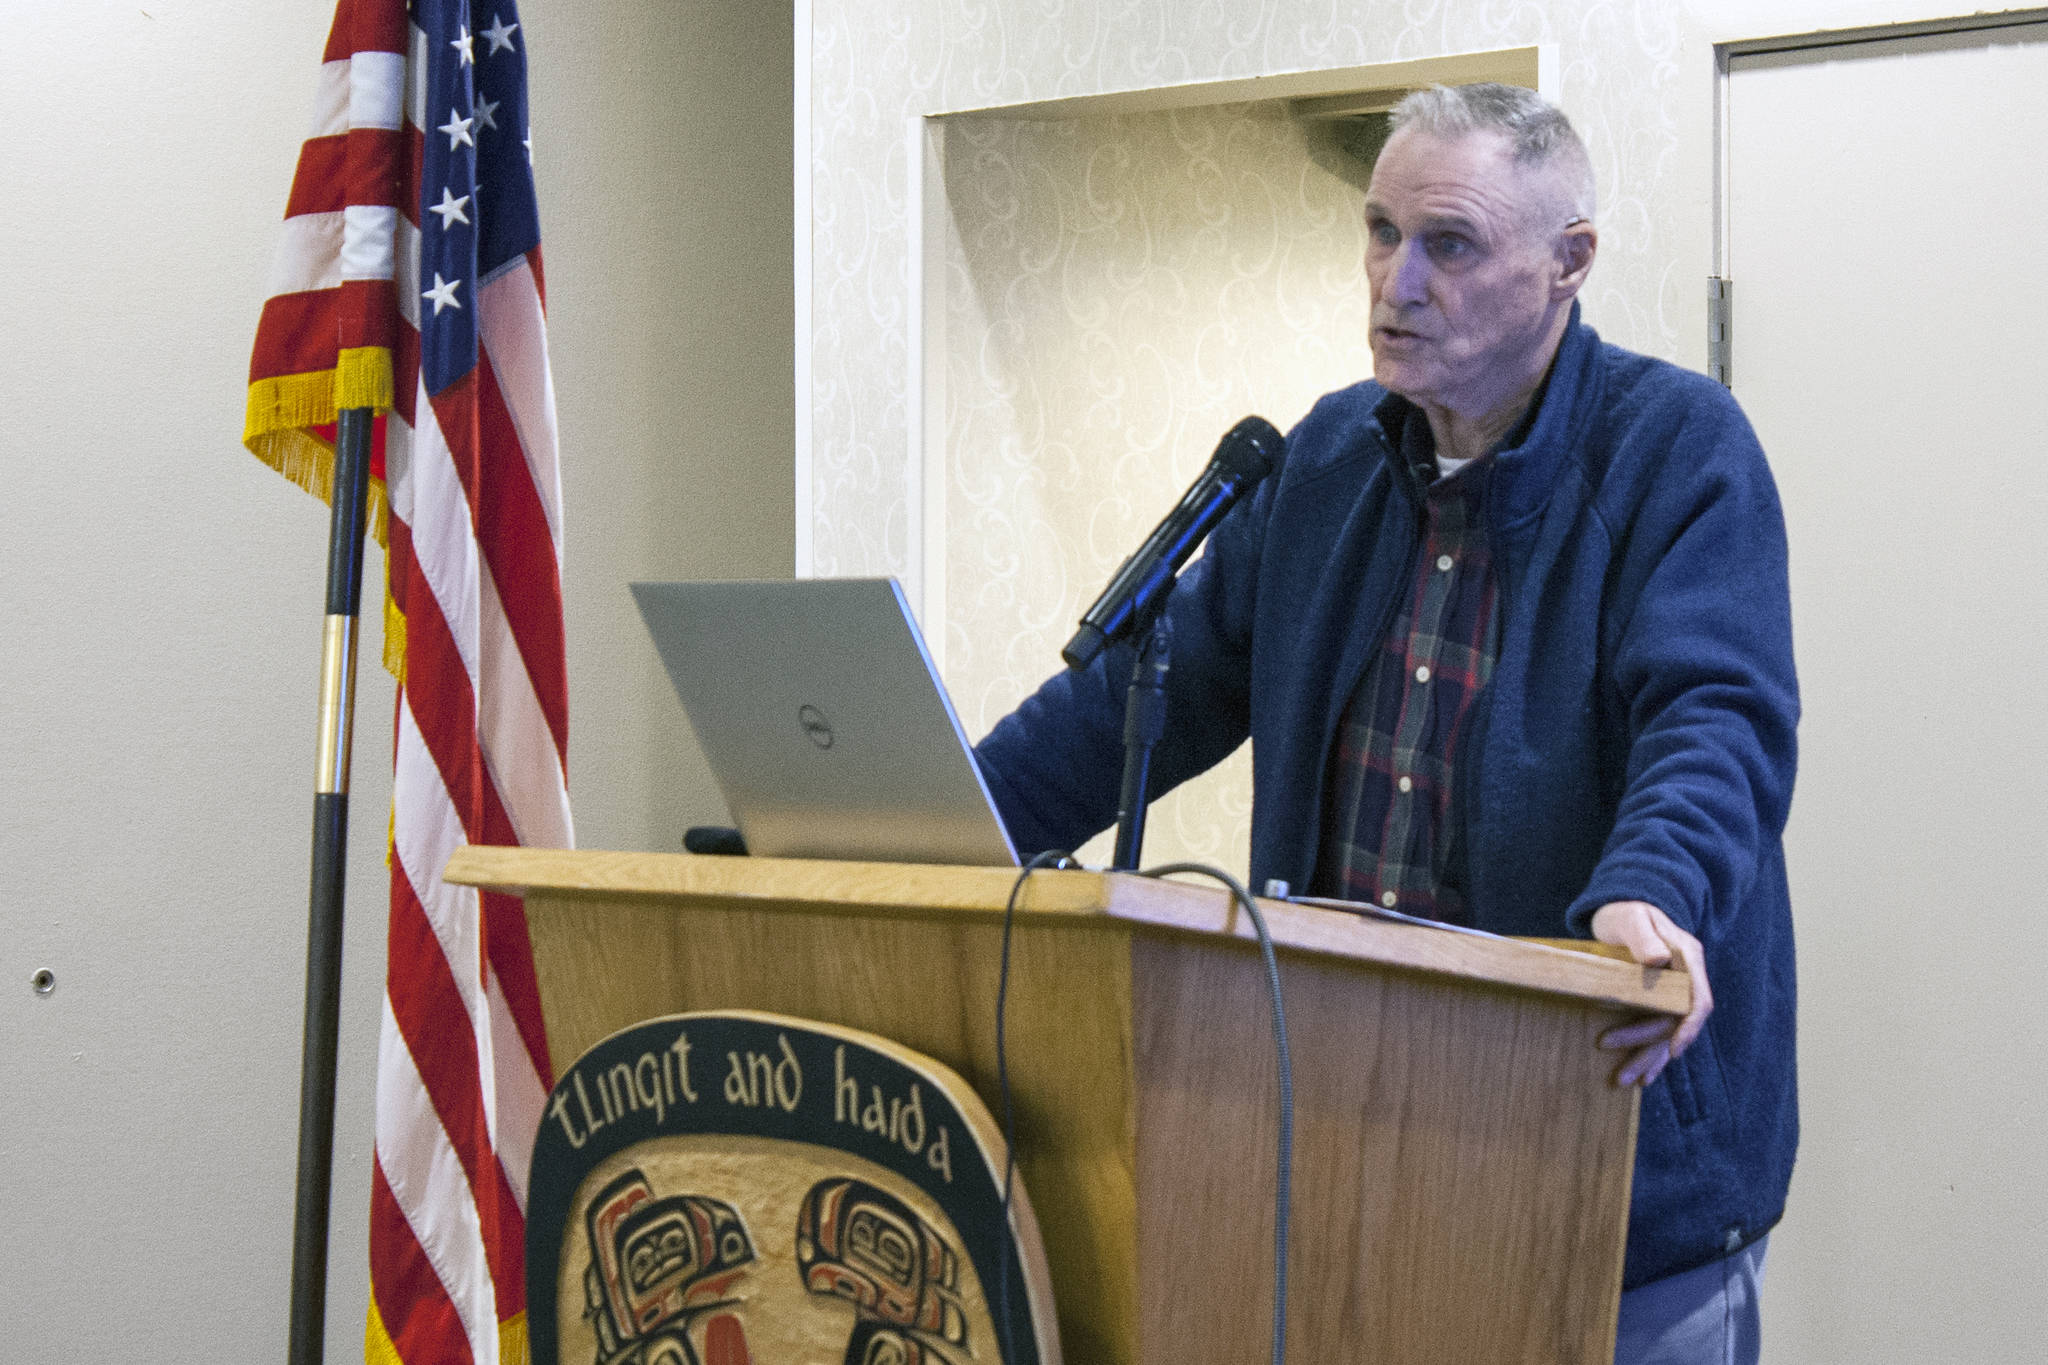 Bill Corbus, former revenue commissioner and past president of Alaska Electric Light and Power Company, speaks Thursday at a Greater Juneau Chamber of Commerce meeting at Elizabeth Peratrovich Hall. (Ben Hohenstatt | Juneau Empire)